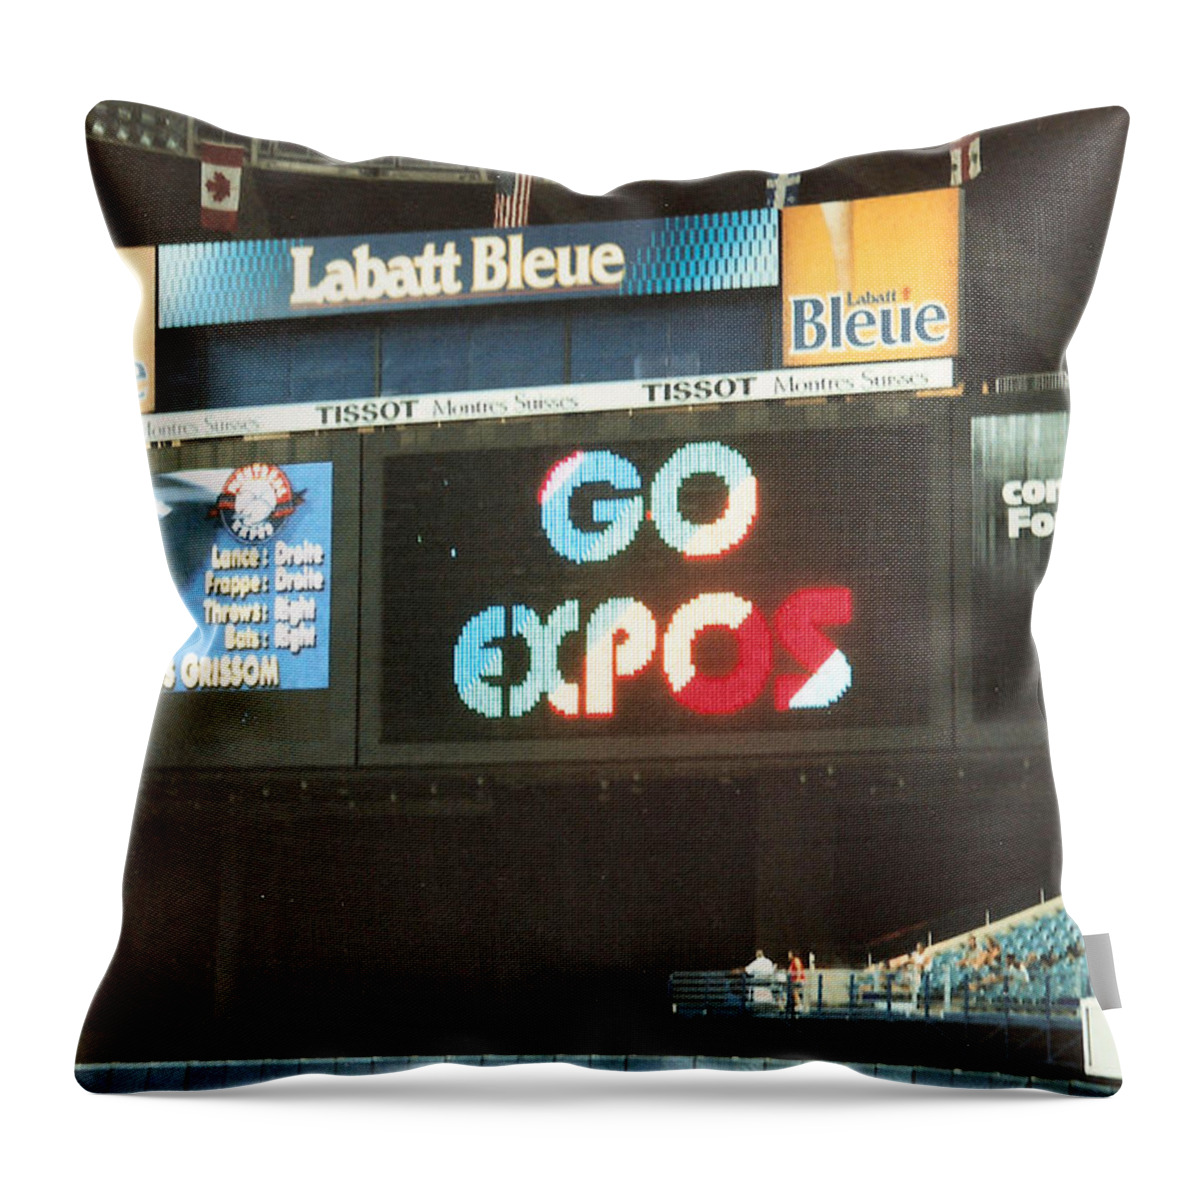 The Score Board At The Olympic Stadium In Montreal Throw Pillow featuring the mixed media The Score Board at The Olympic Stadium in Montreal by Asbjorn Lonvig